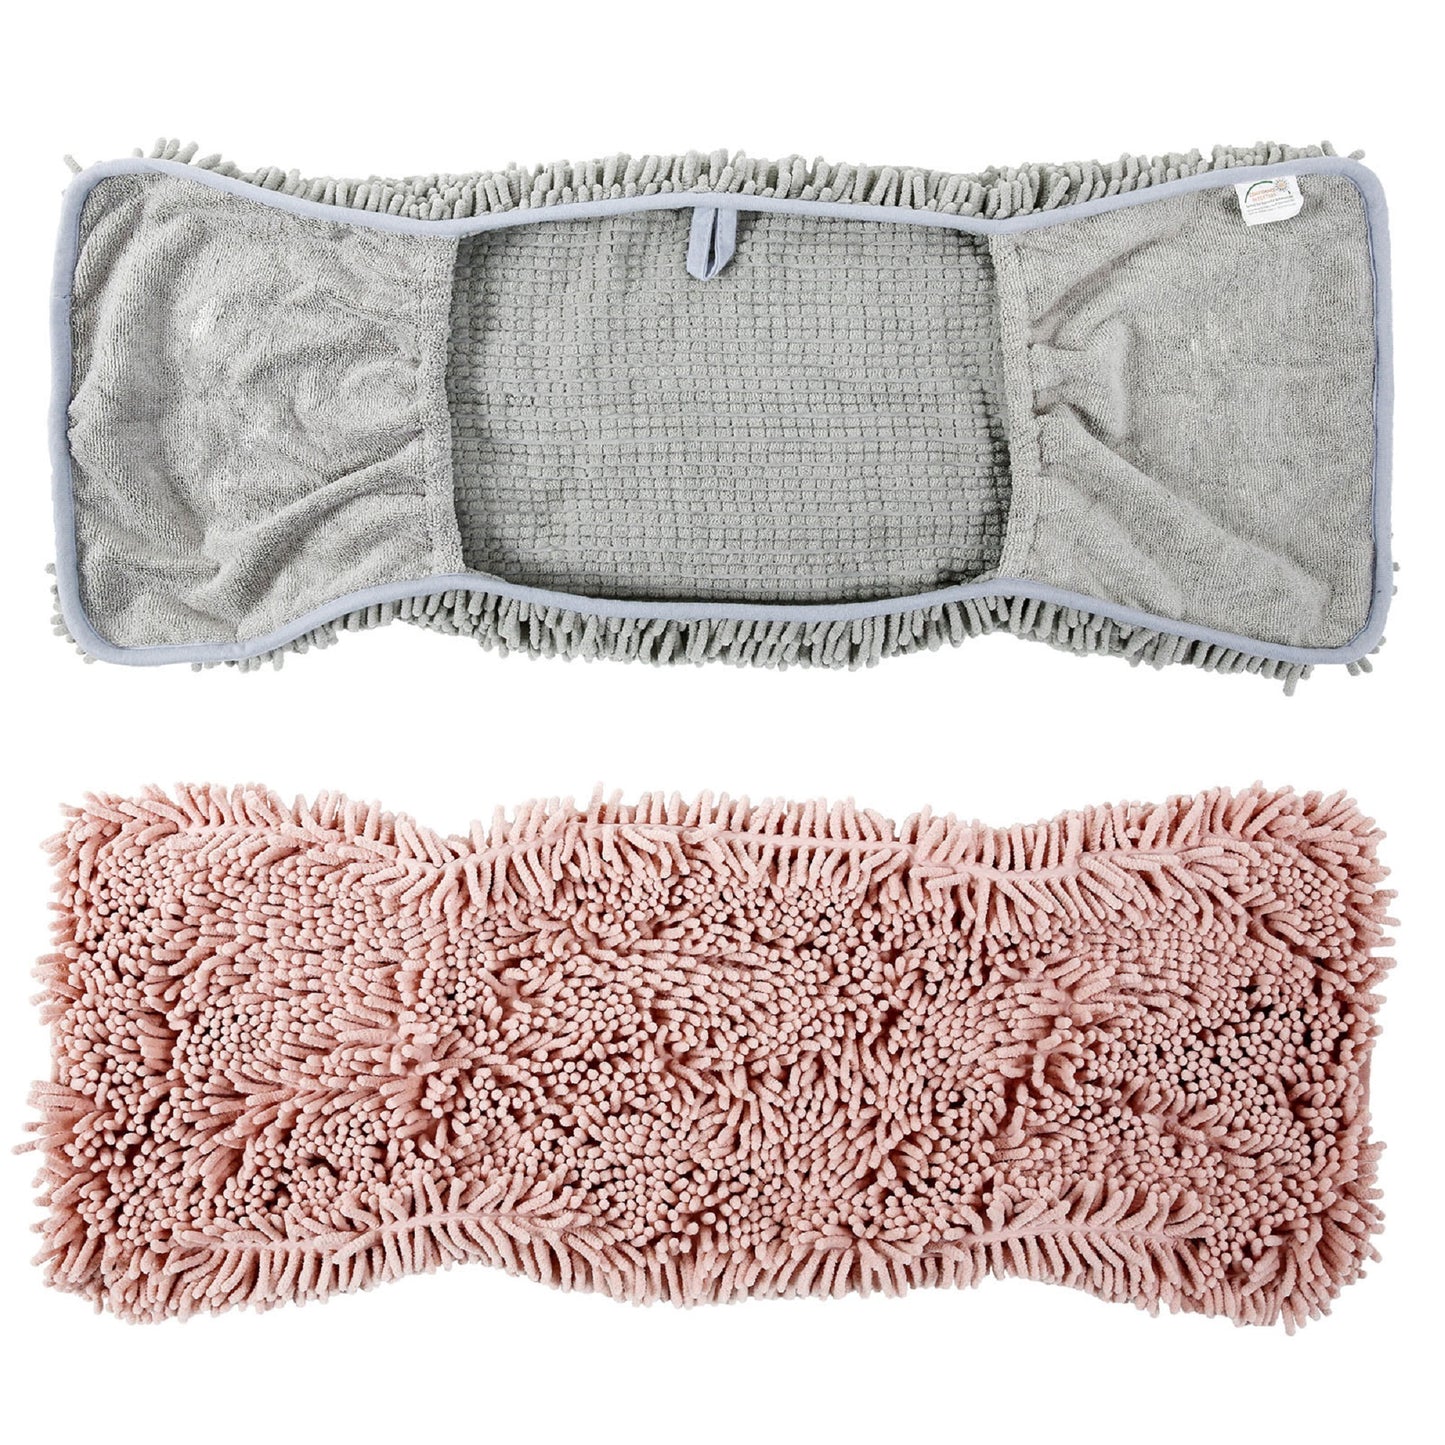 2 Pack Luxury Absorbent Dog Towels, (35"x15") Extra Large Microfiber Quick Drying Dog Shammy with Hand Pockets Pet Towel for Dog and Cat, Machine Washable (Grey+Pink)